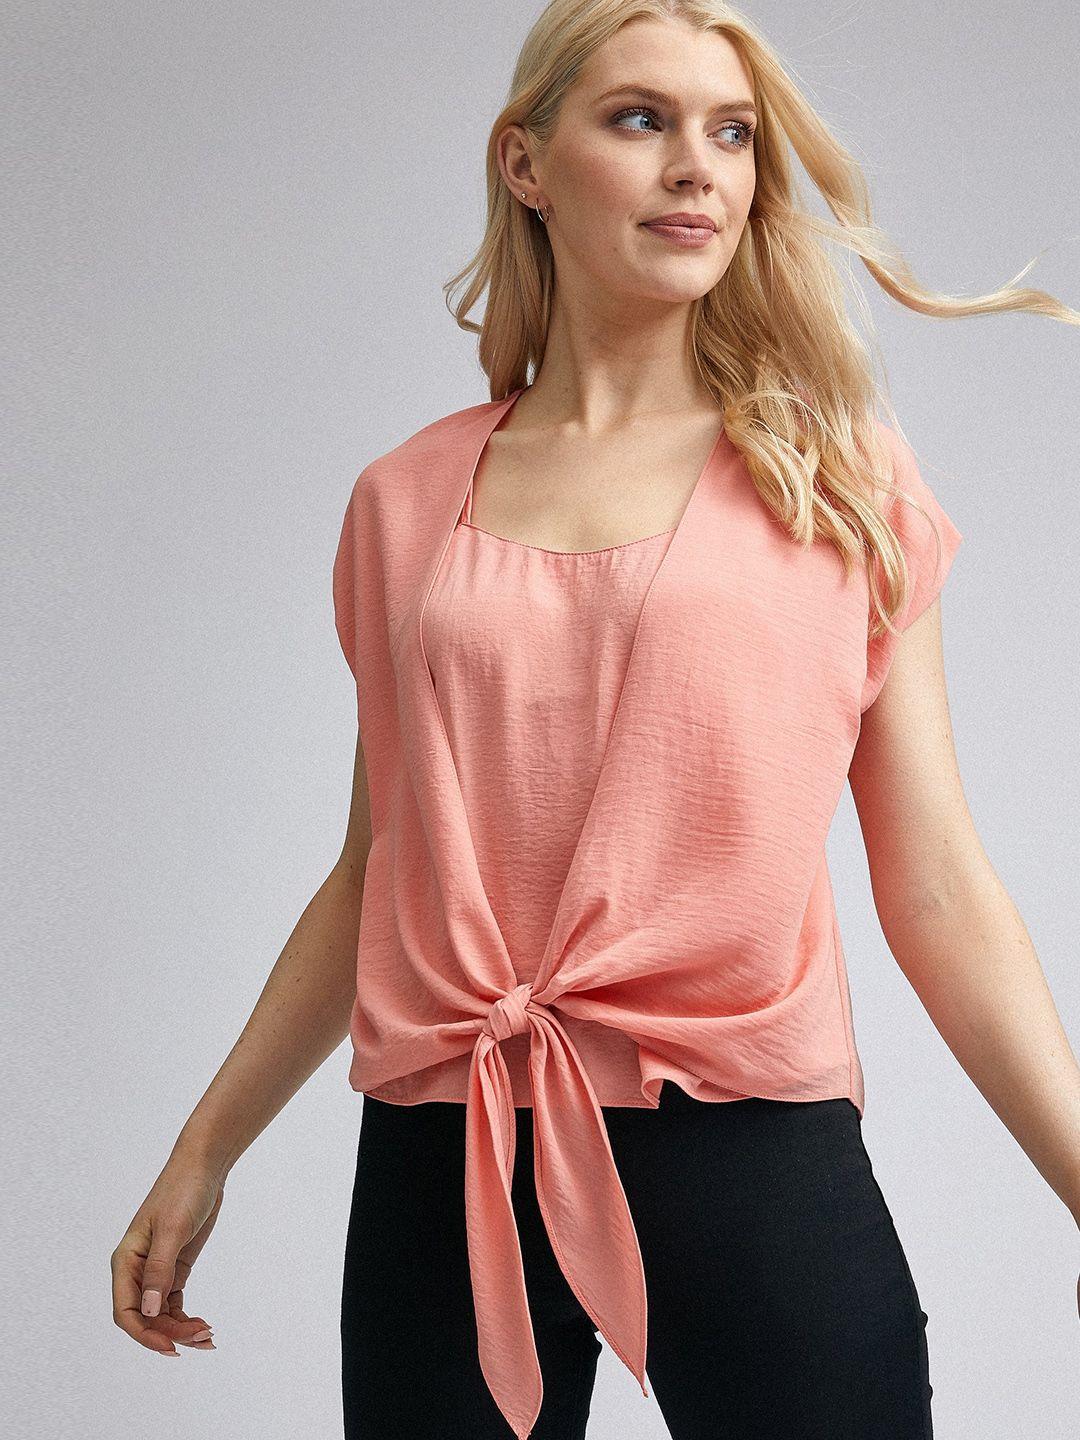 dorothy perkins women peach-coloured solid layered top